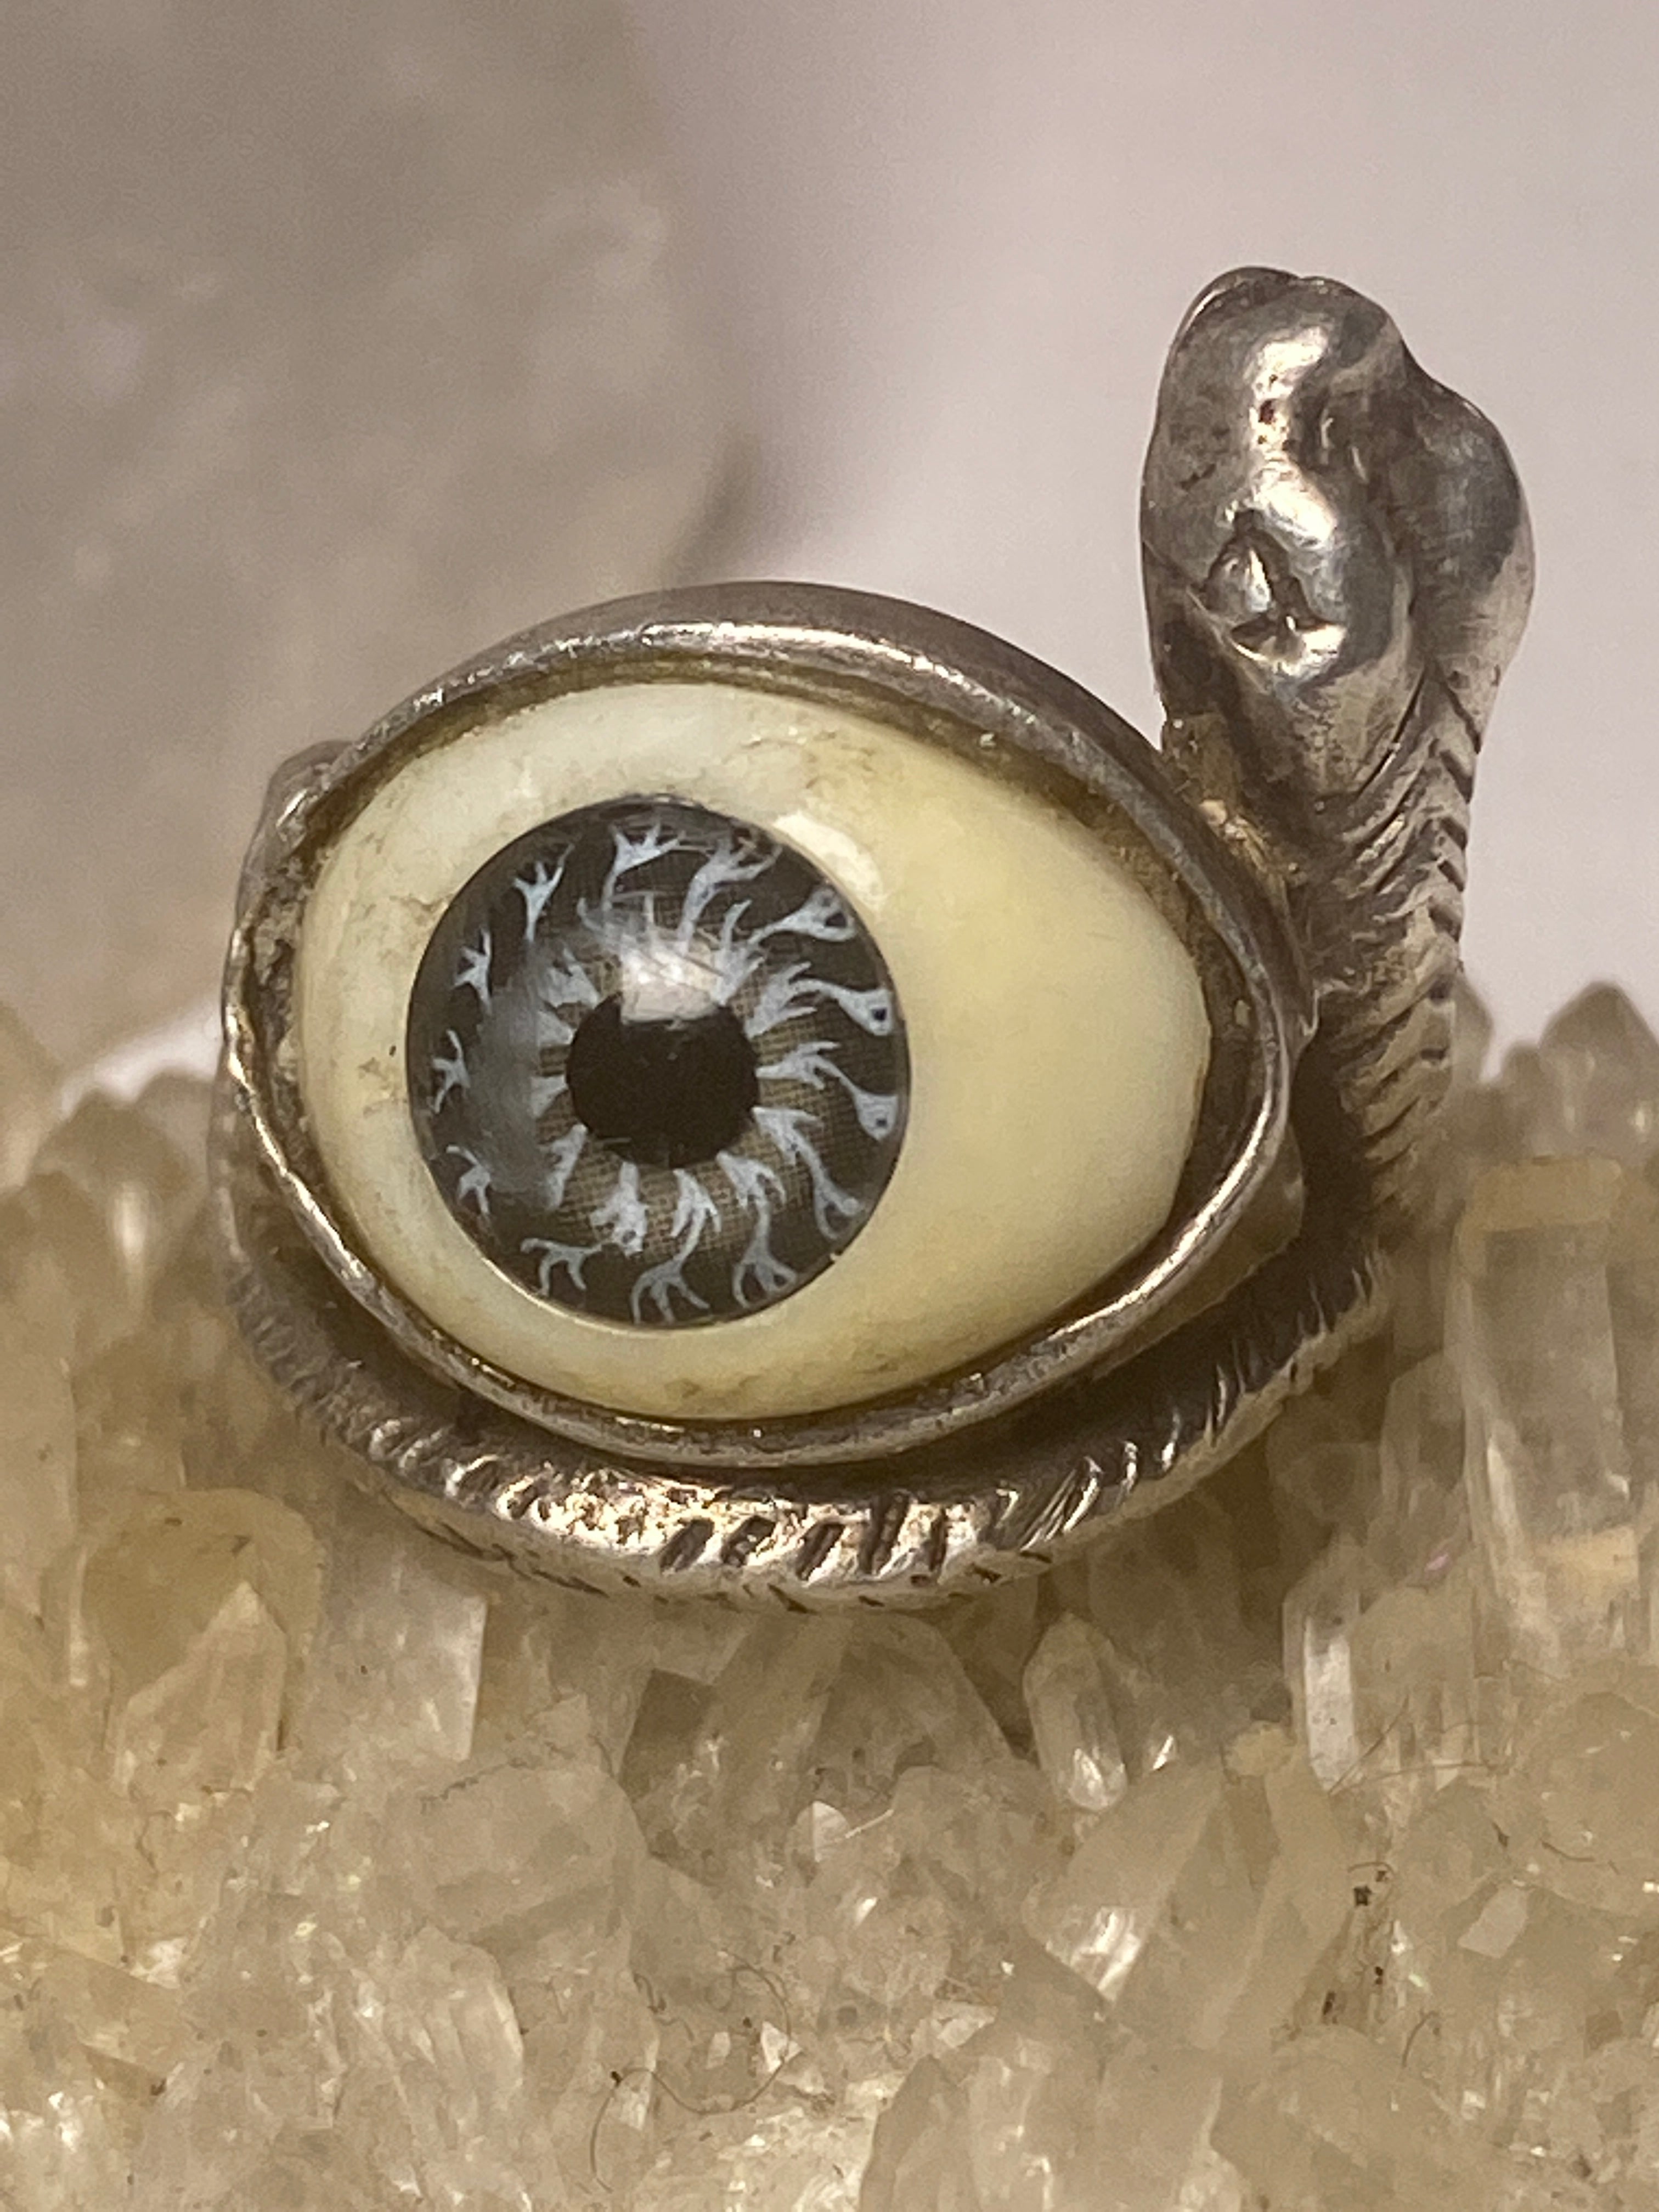 THE GREAT FROG EYE RING - リング